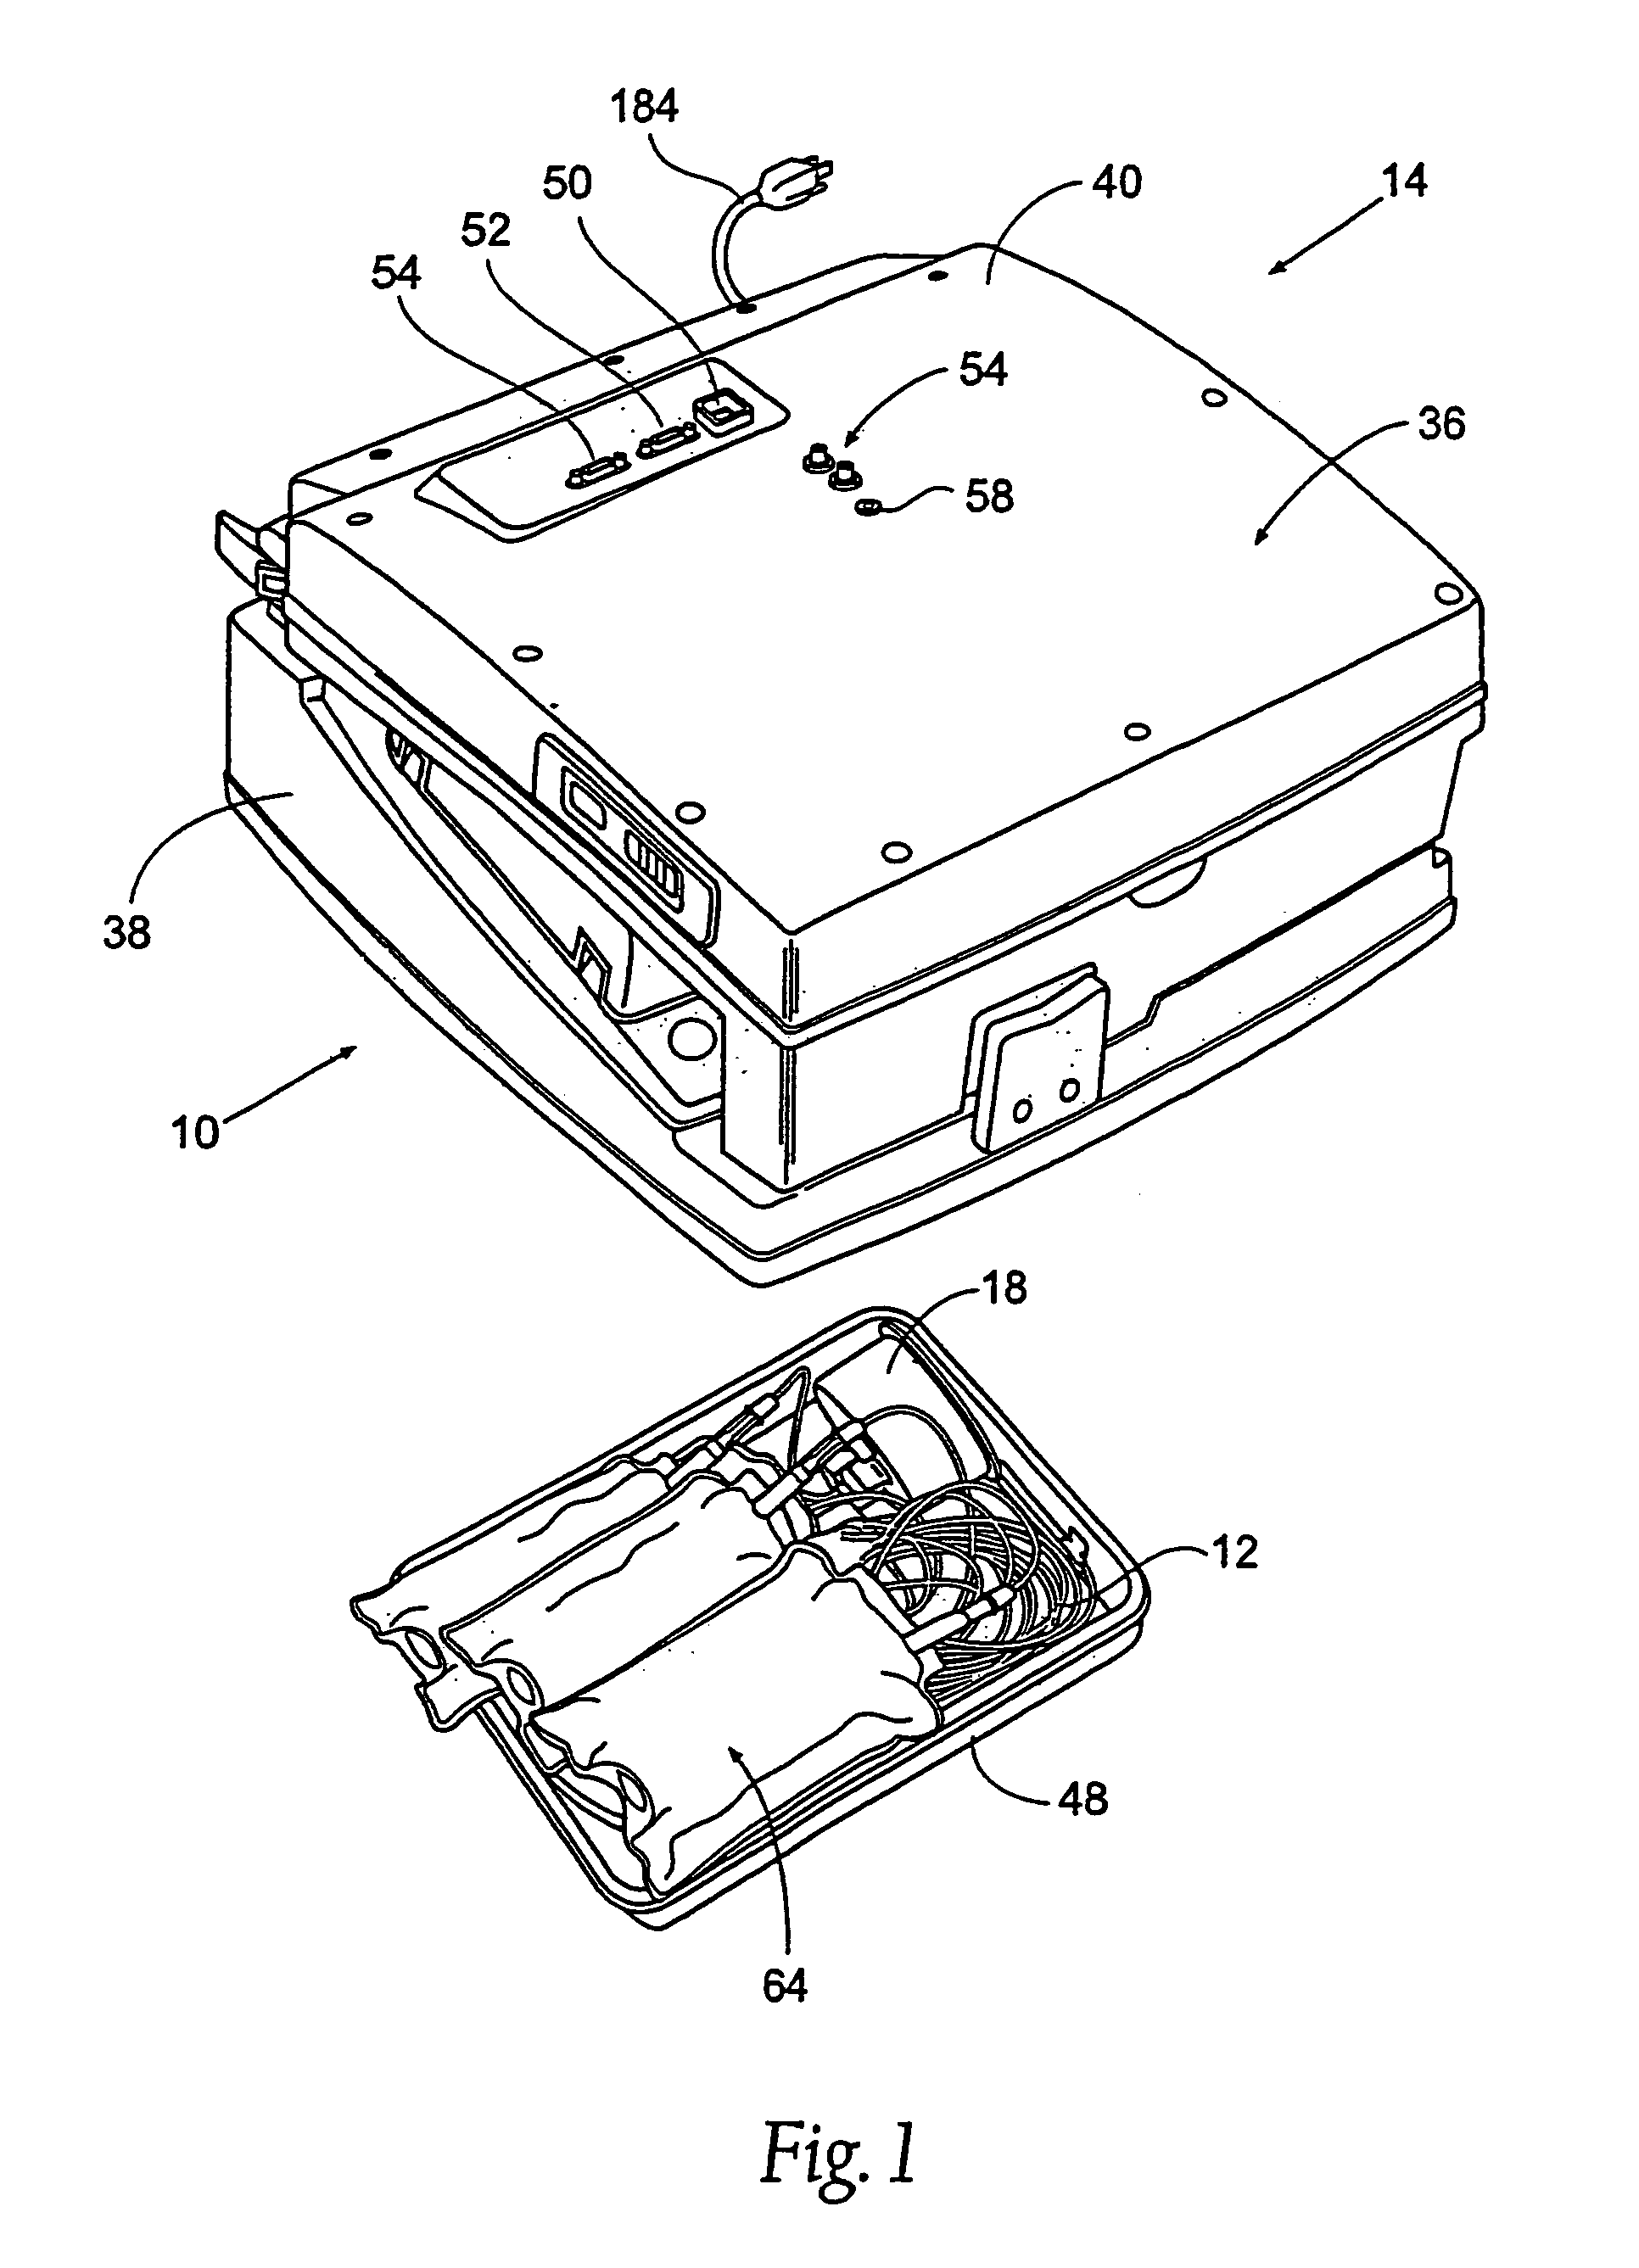 Red blood cell processing systems and methods which control red blood cell hematocrit